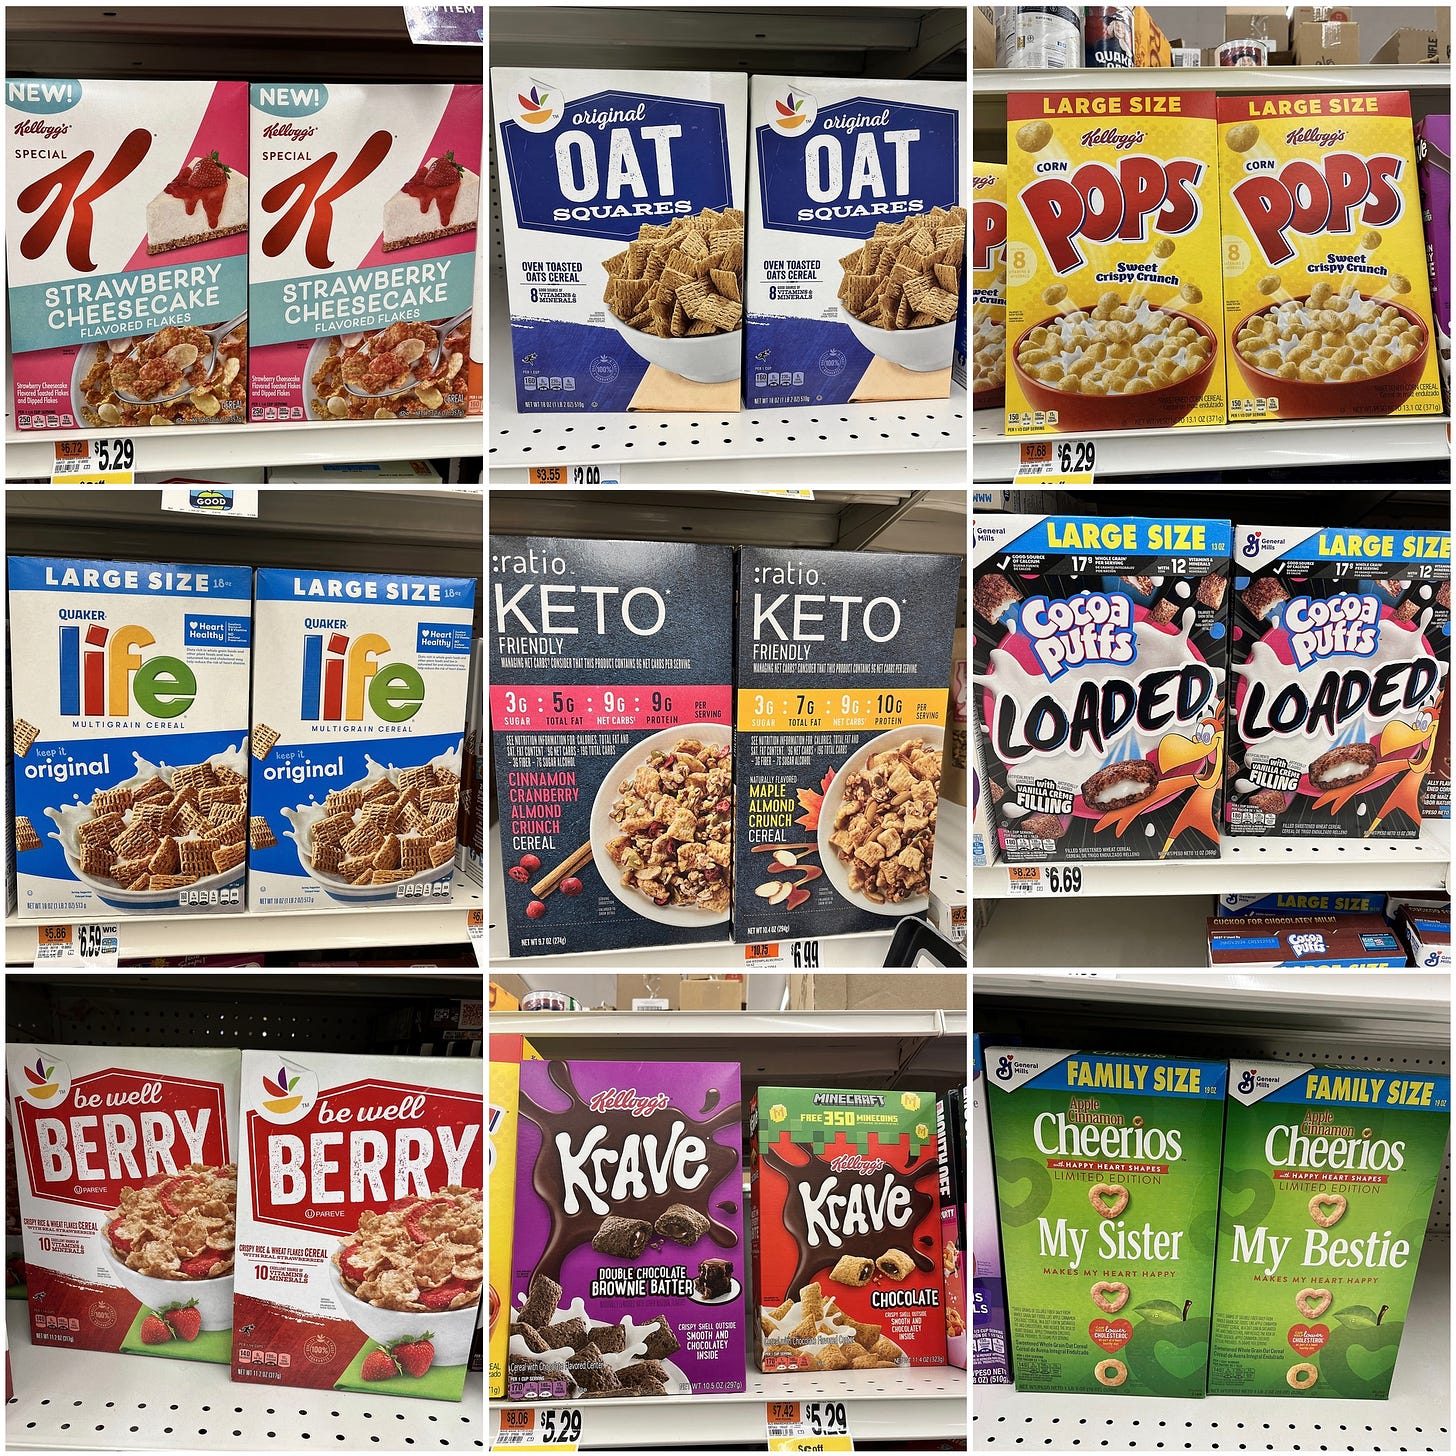 Photos of cereal boxes in a 3x3 grid from Instagram